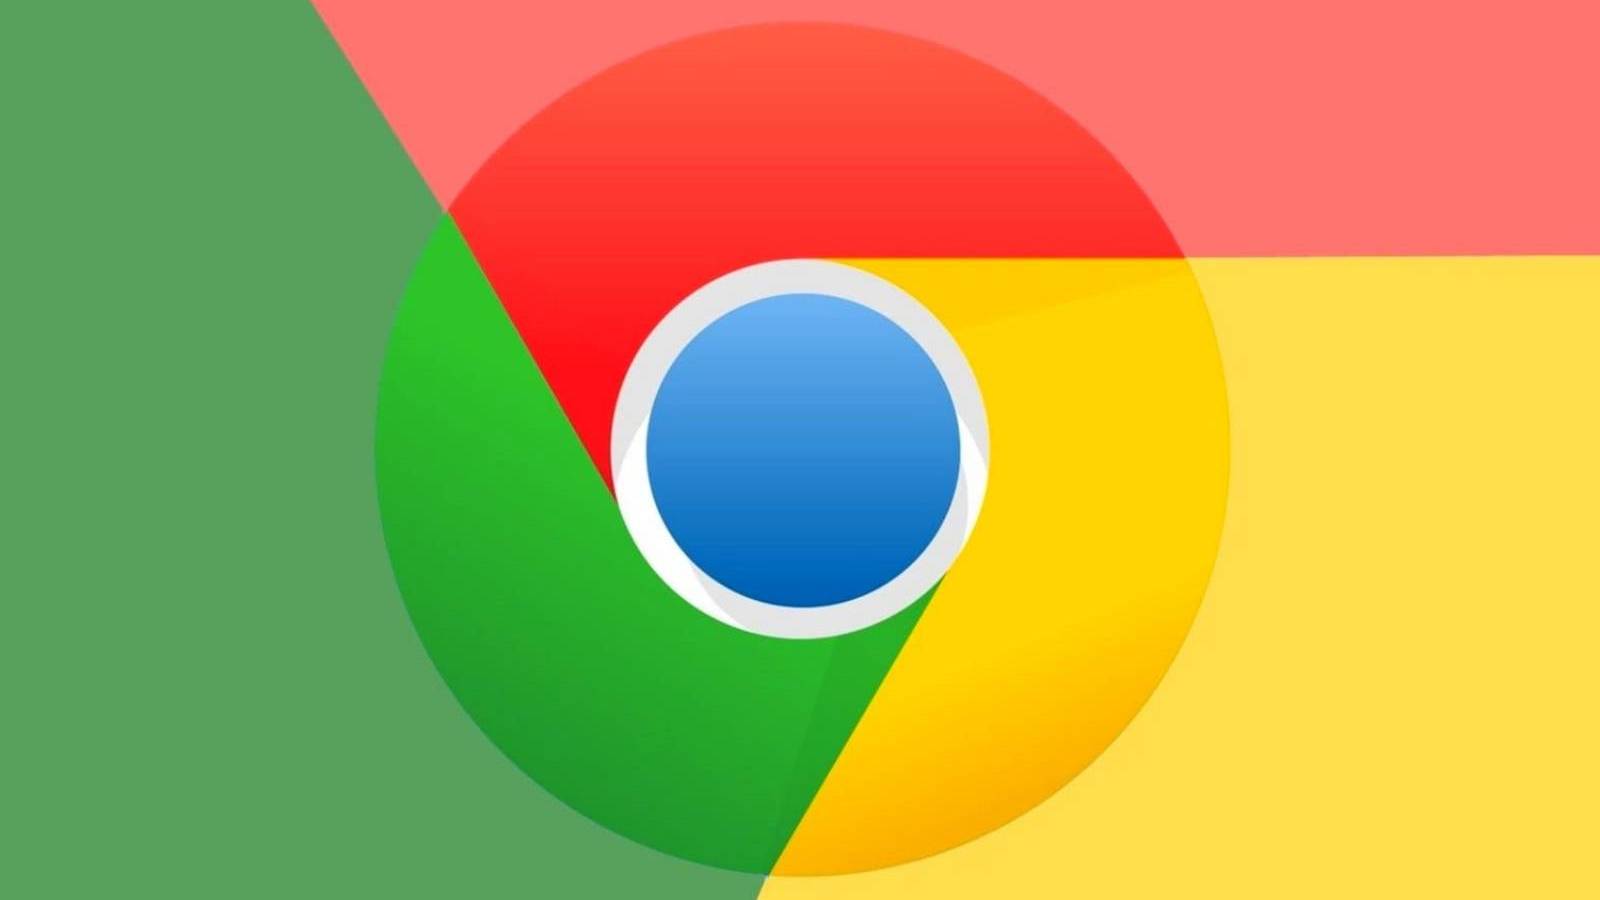 Google Chrome has been updated, what changes are coming to phones